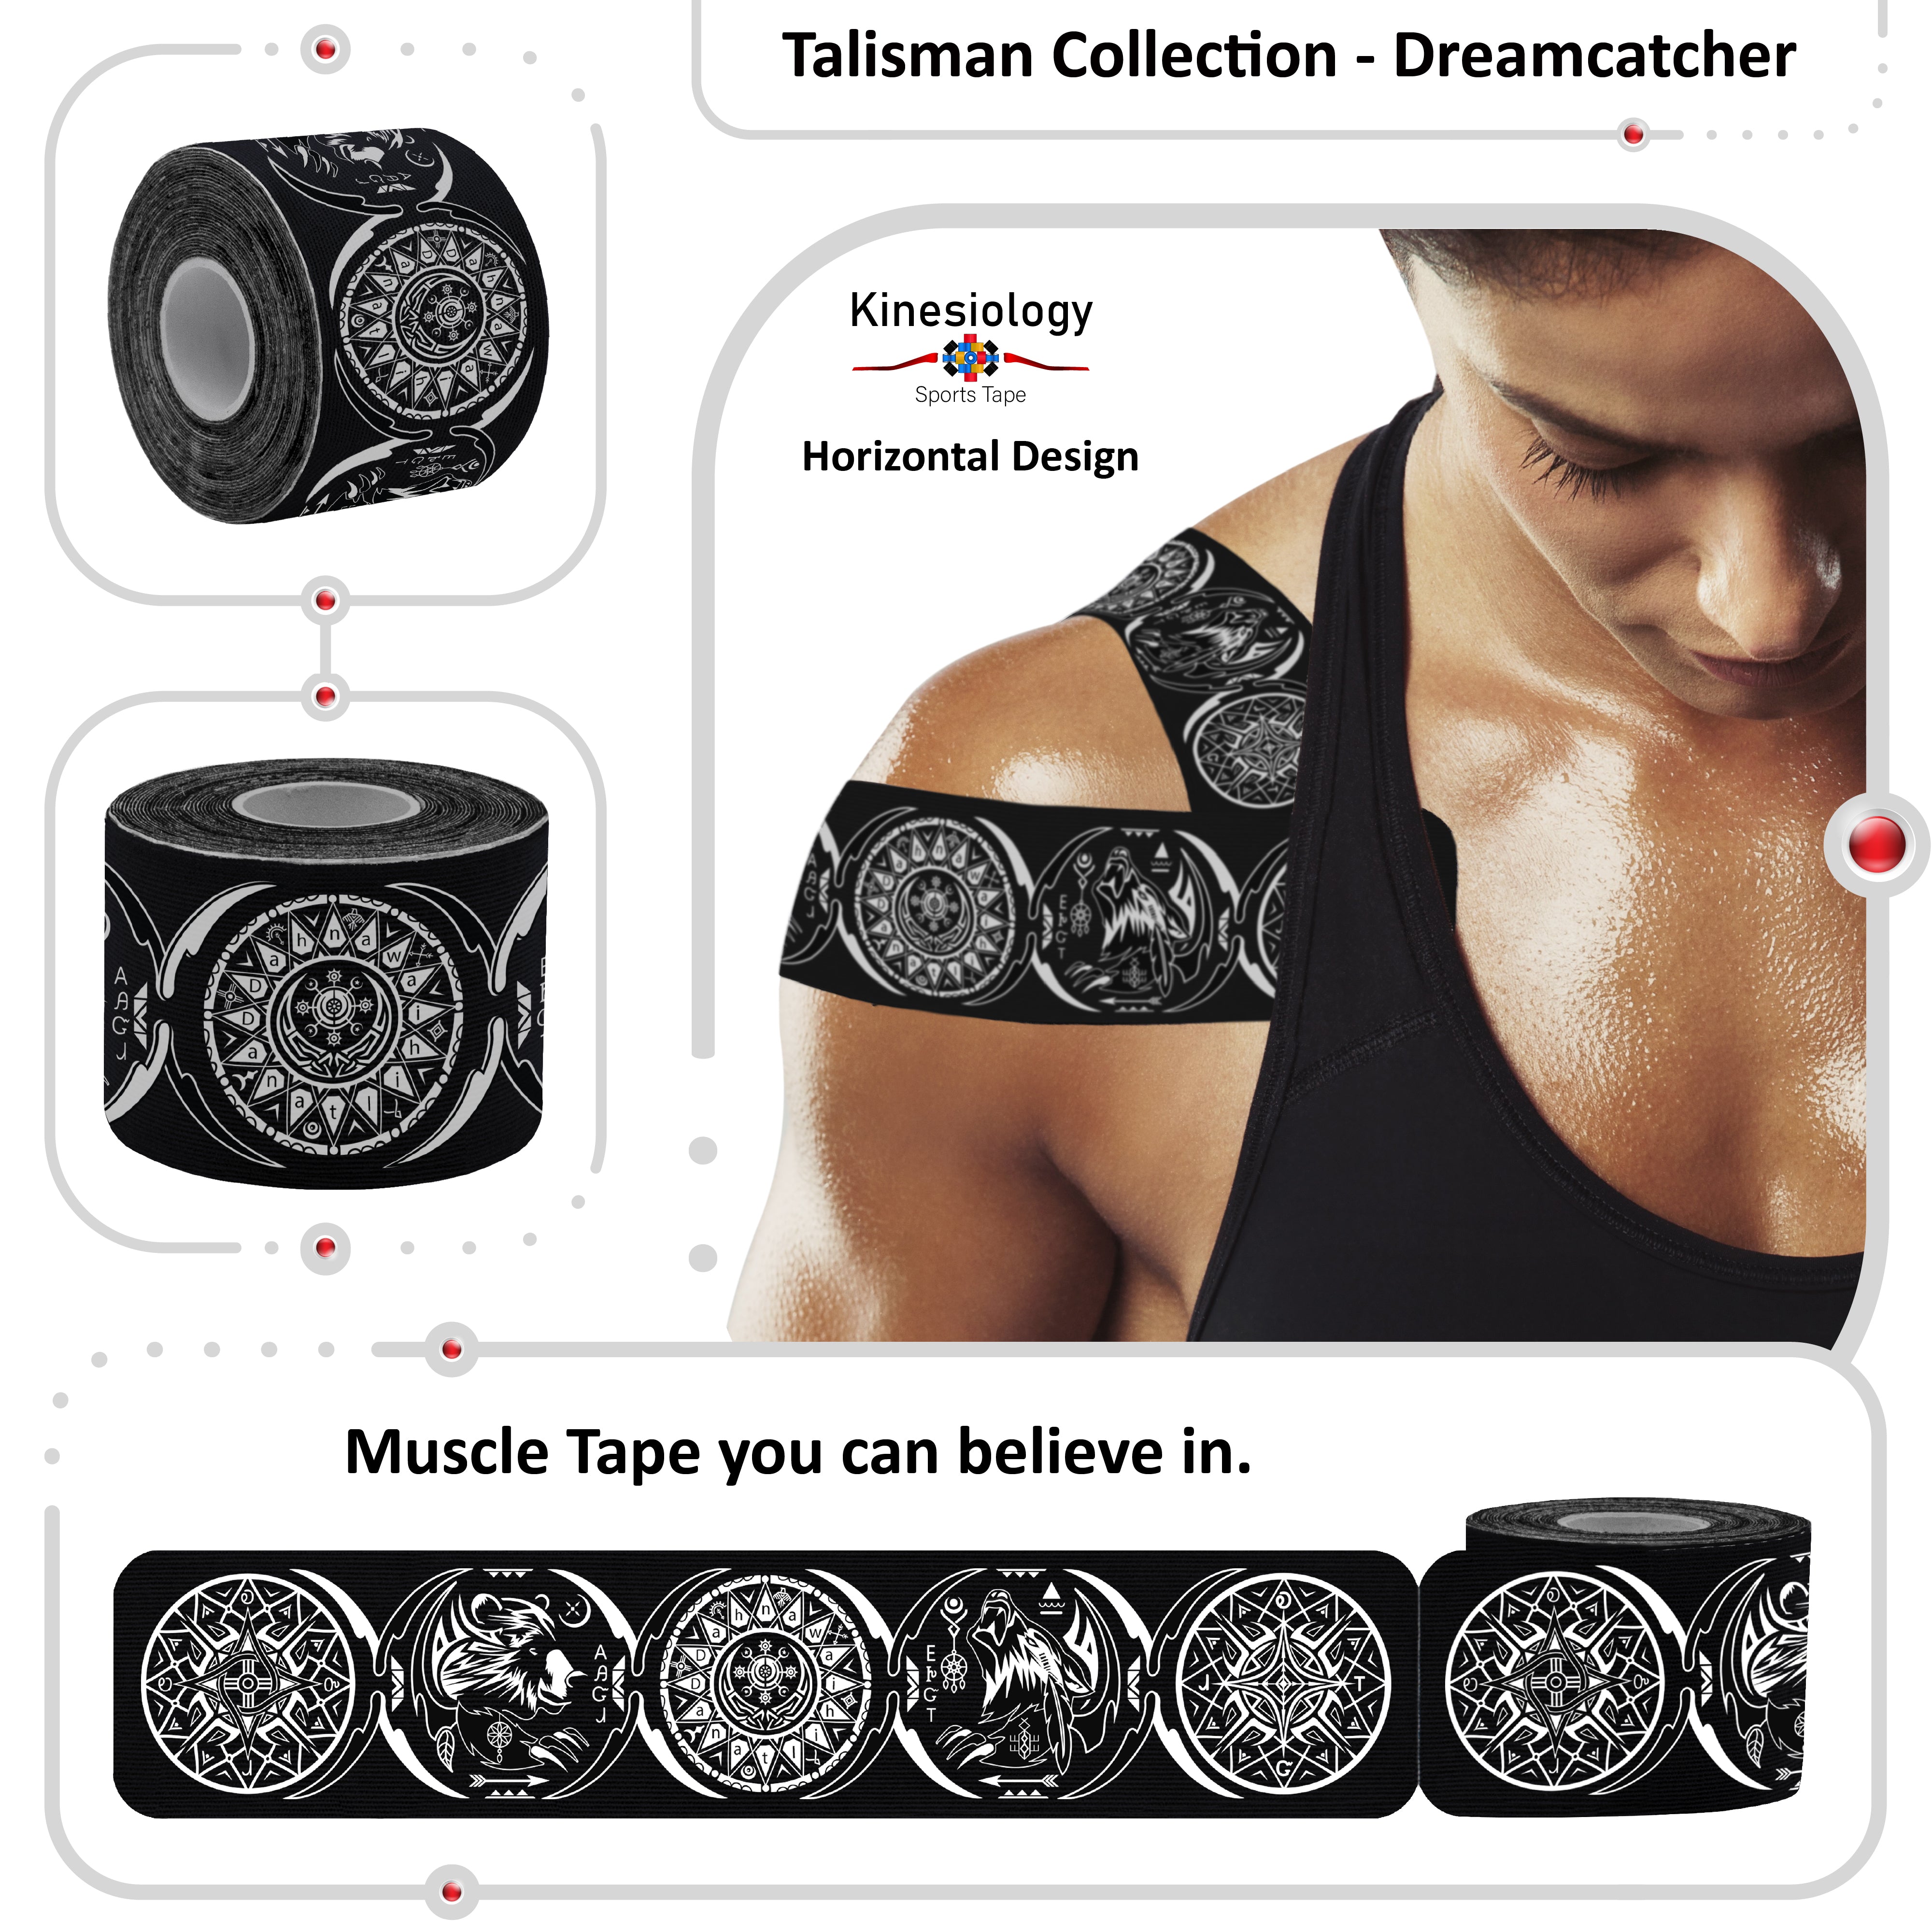 Black Kinesiology Tape Pre Cut with Dispenser - Talisman - Dreamcatcher - Horizontal Design - Athletic Sports Tape - For Healing and Recovery